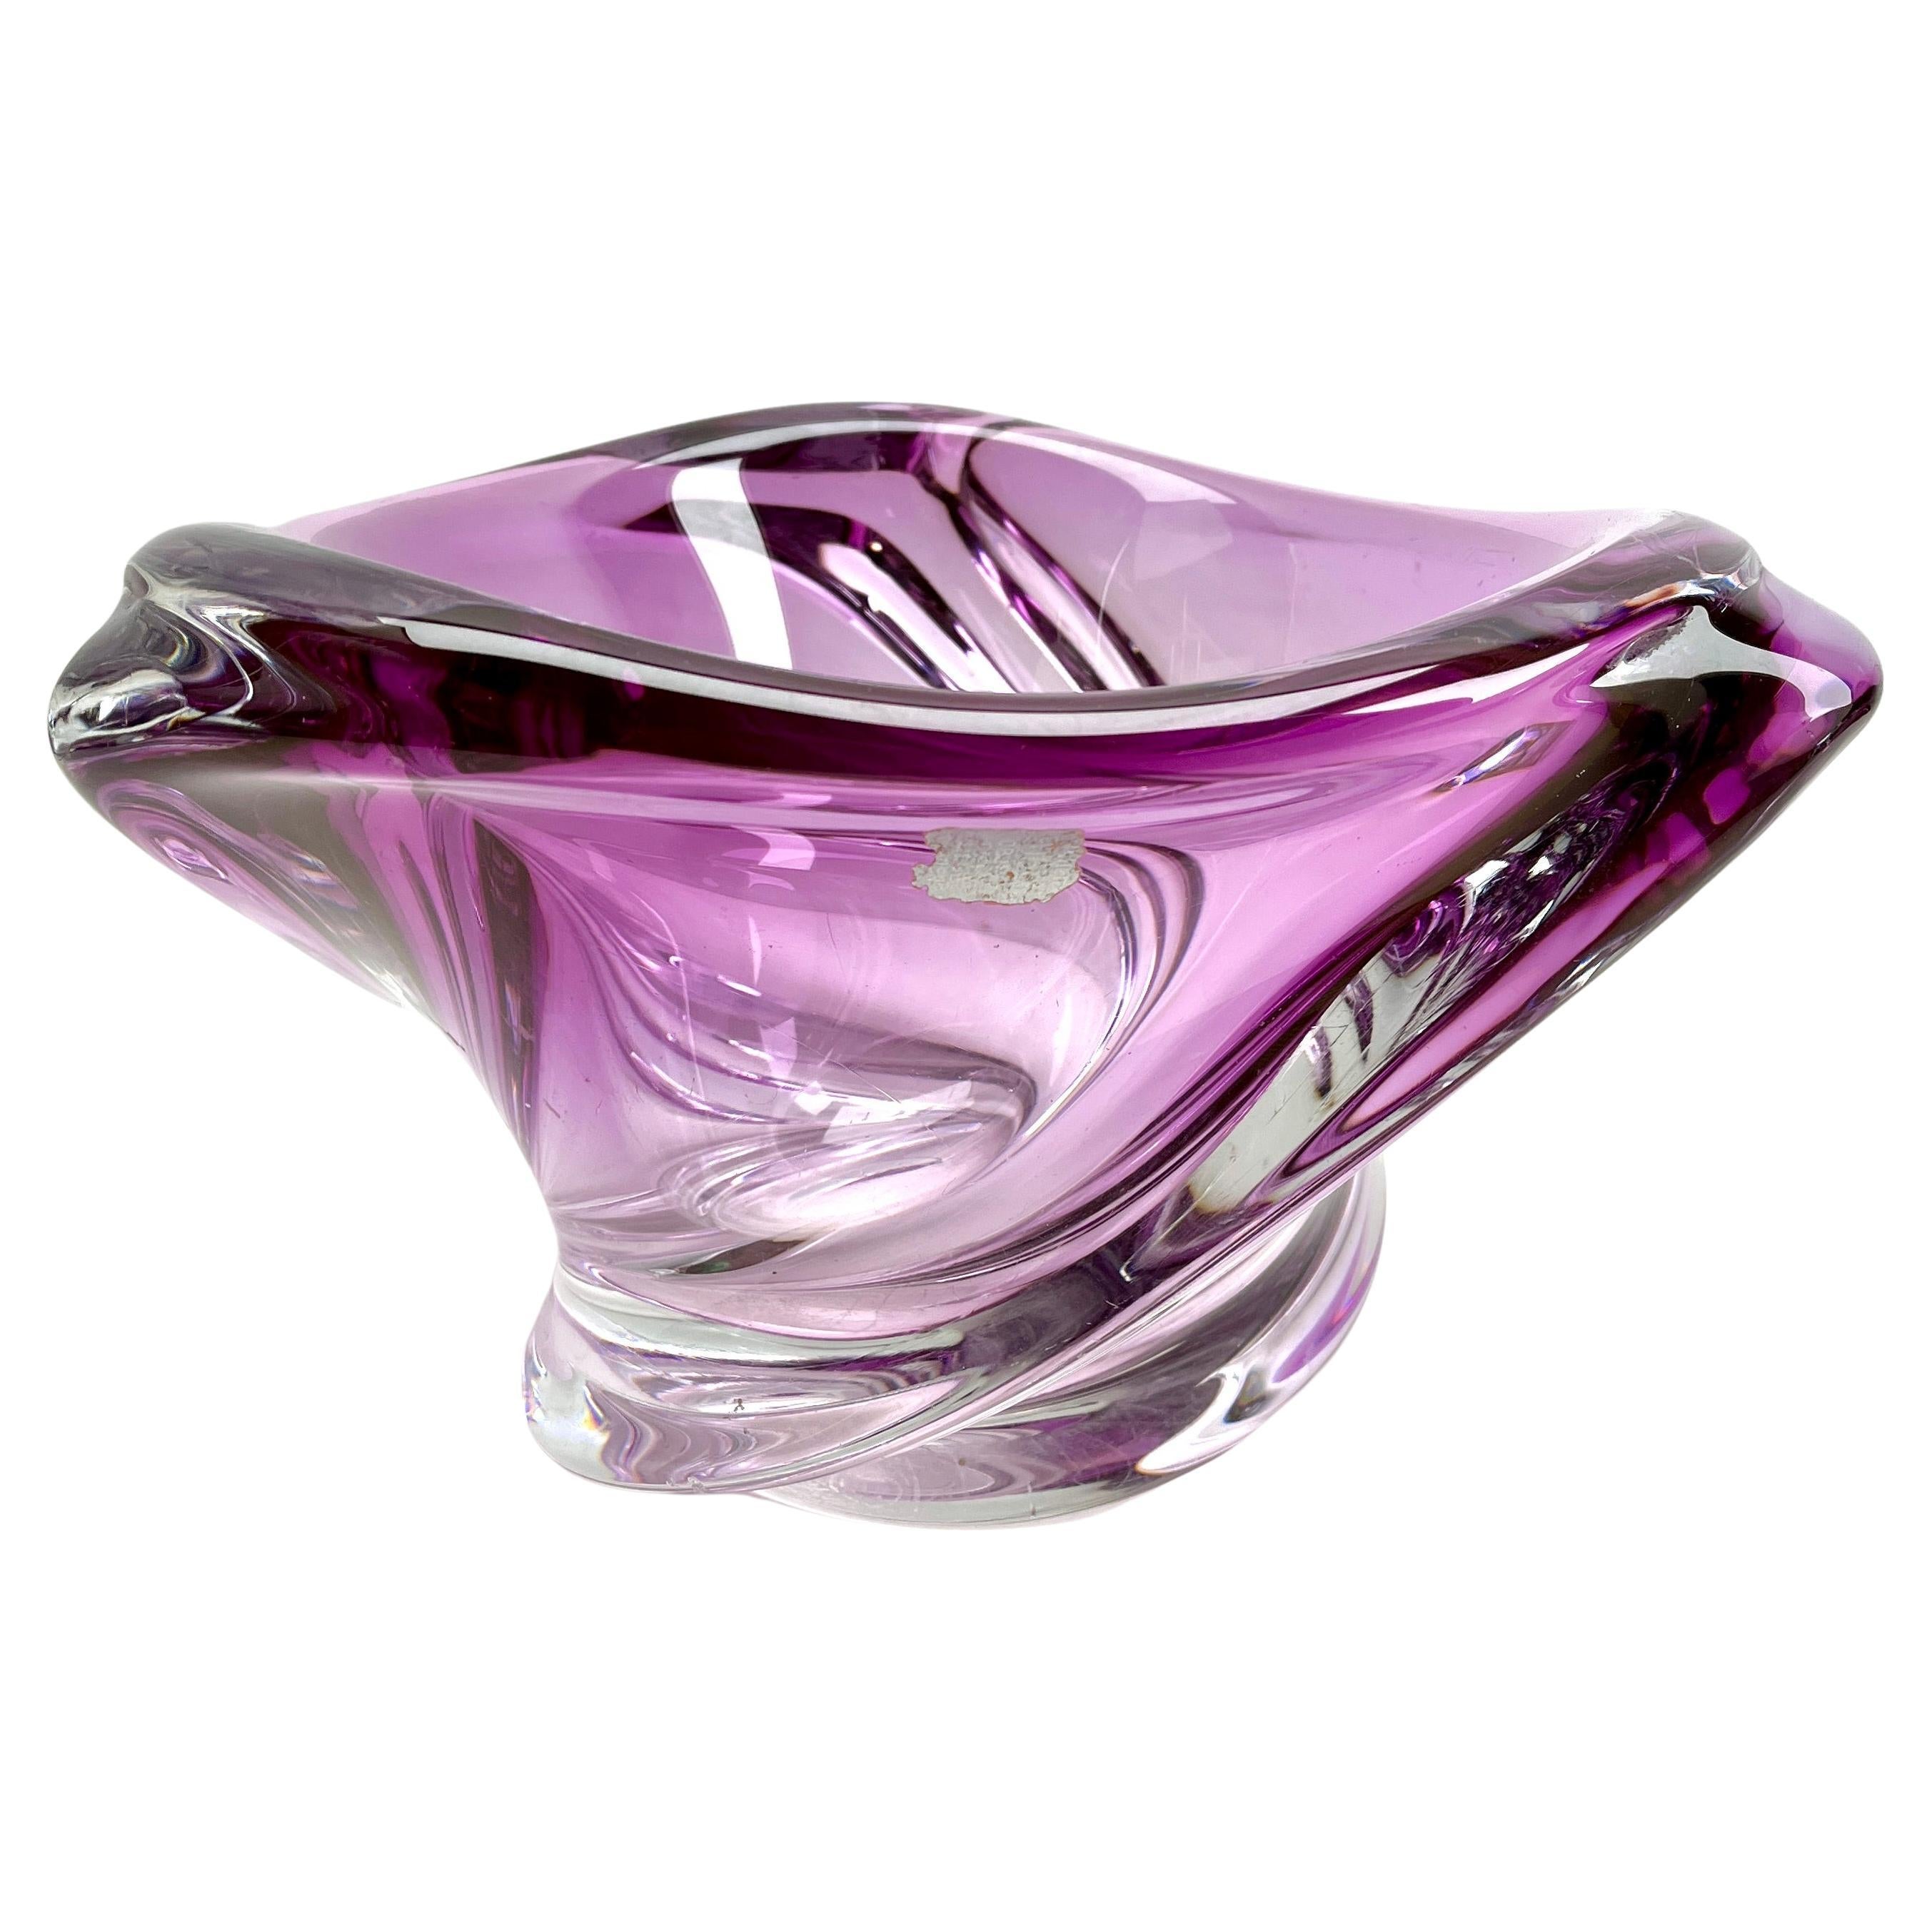 Mid-20th Century Val Saint Lambert Signed Sculpted Crystal Vase with Sommerso Core, Belgium For Sale